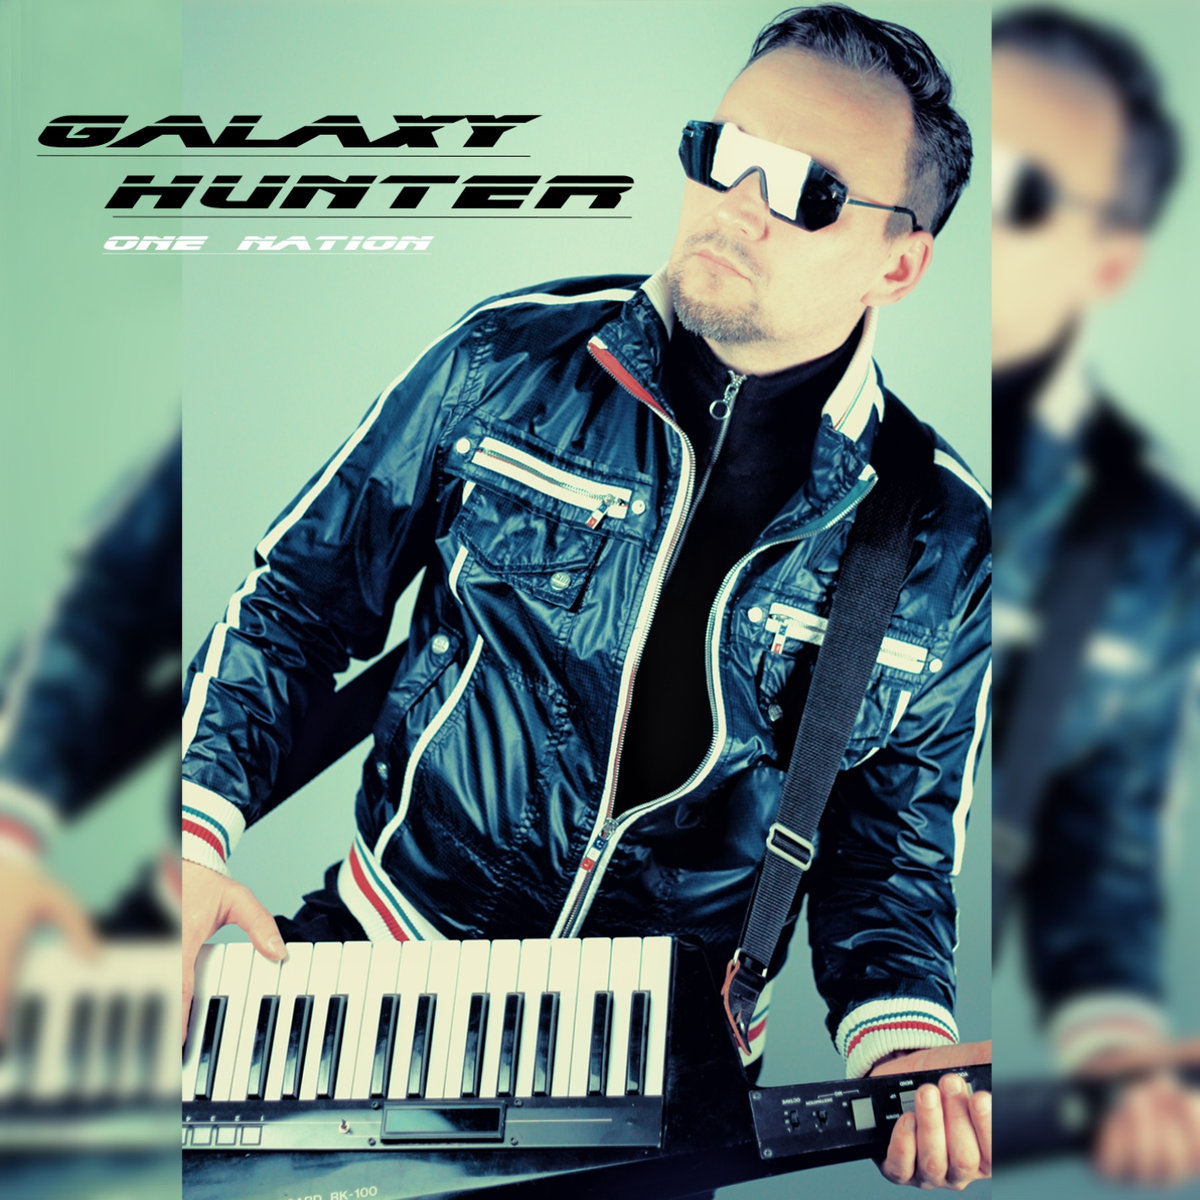 Galaxy Hunter · One Nation [SPACESYNTH] (2018 · FLAC+MP3)